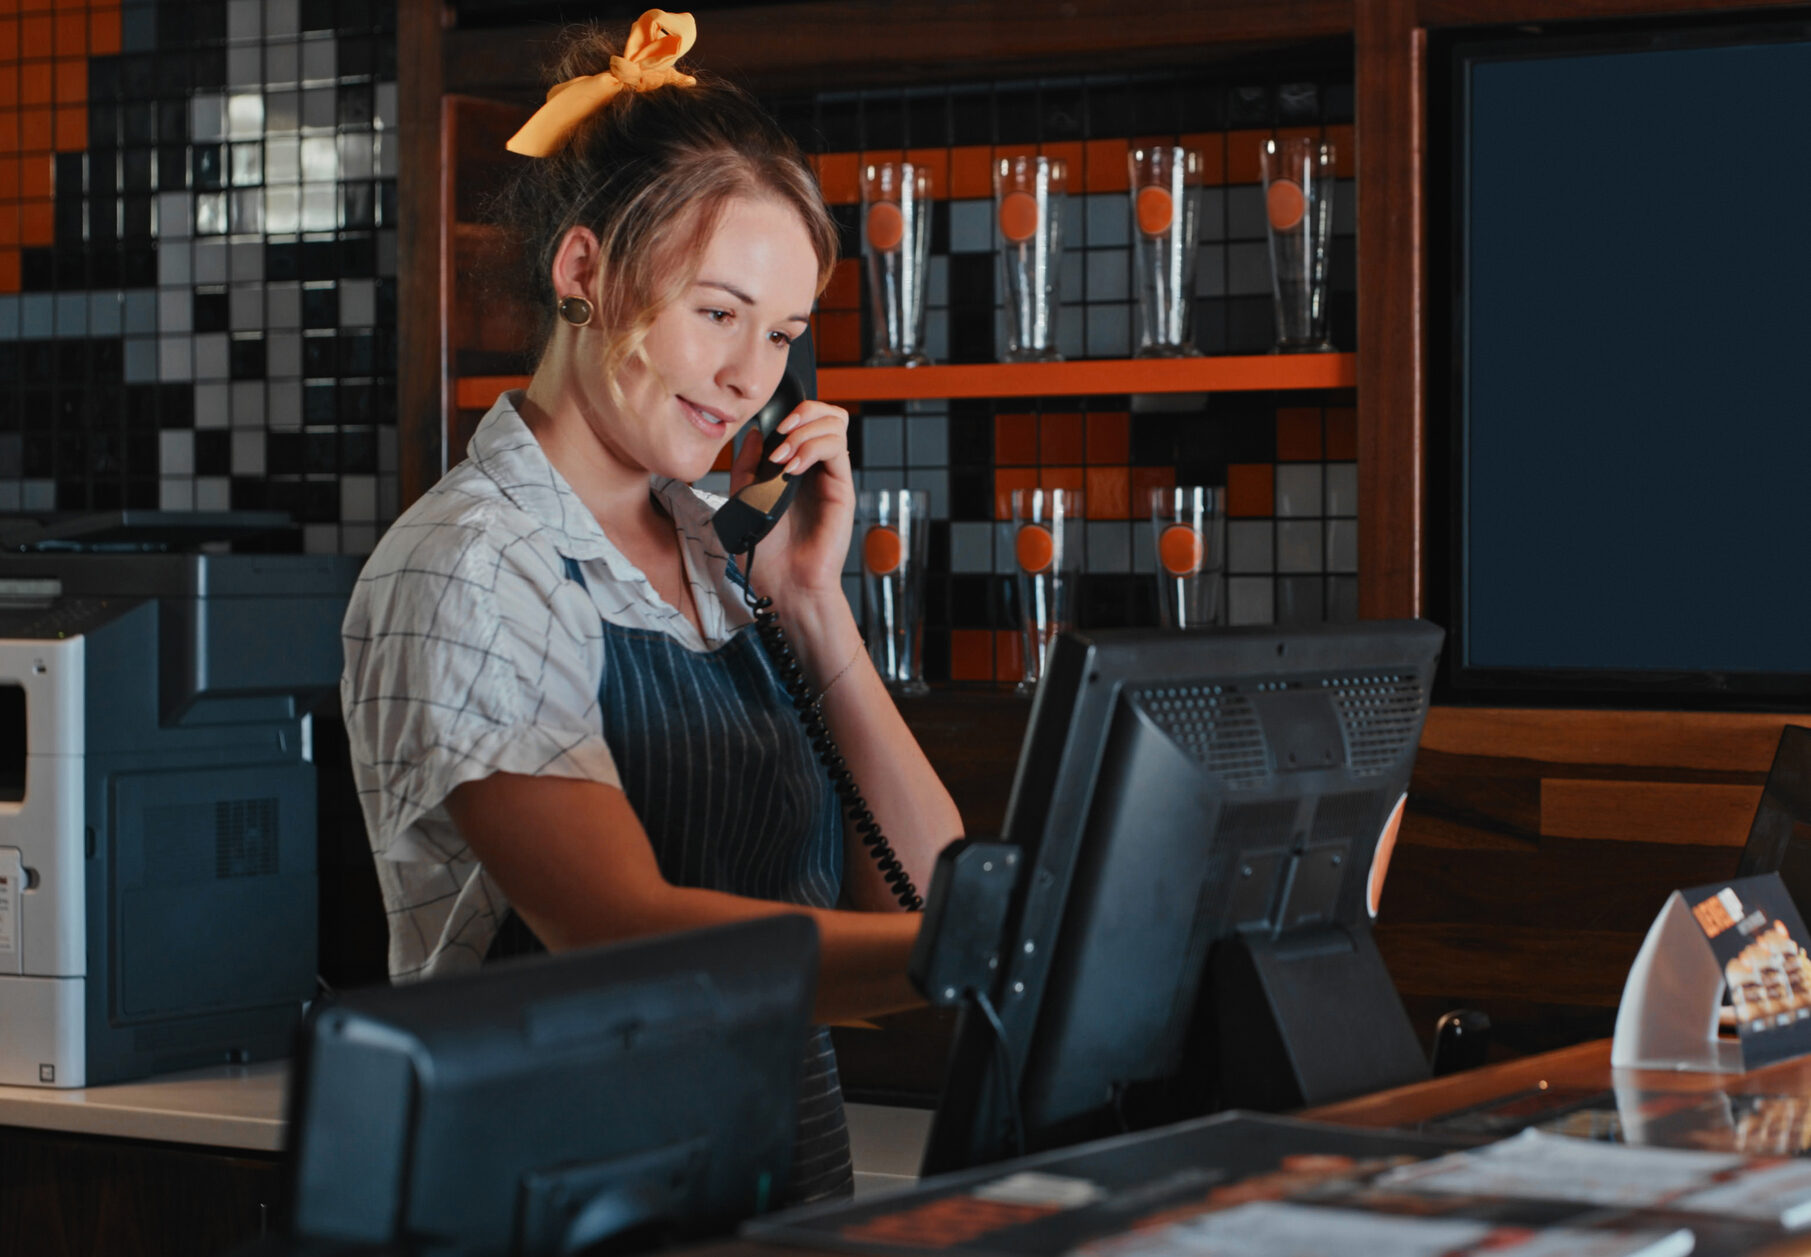 Leverage Next-Generation POS and Restaurant Management Solutions to Enhance Restaurant Operations and Customer Experiences